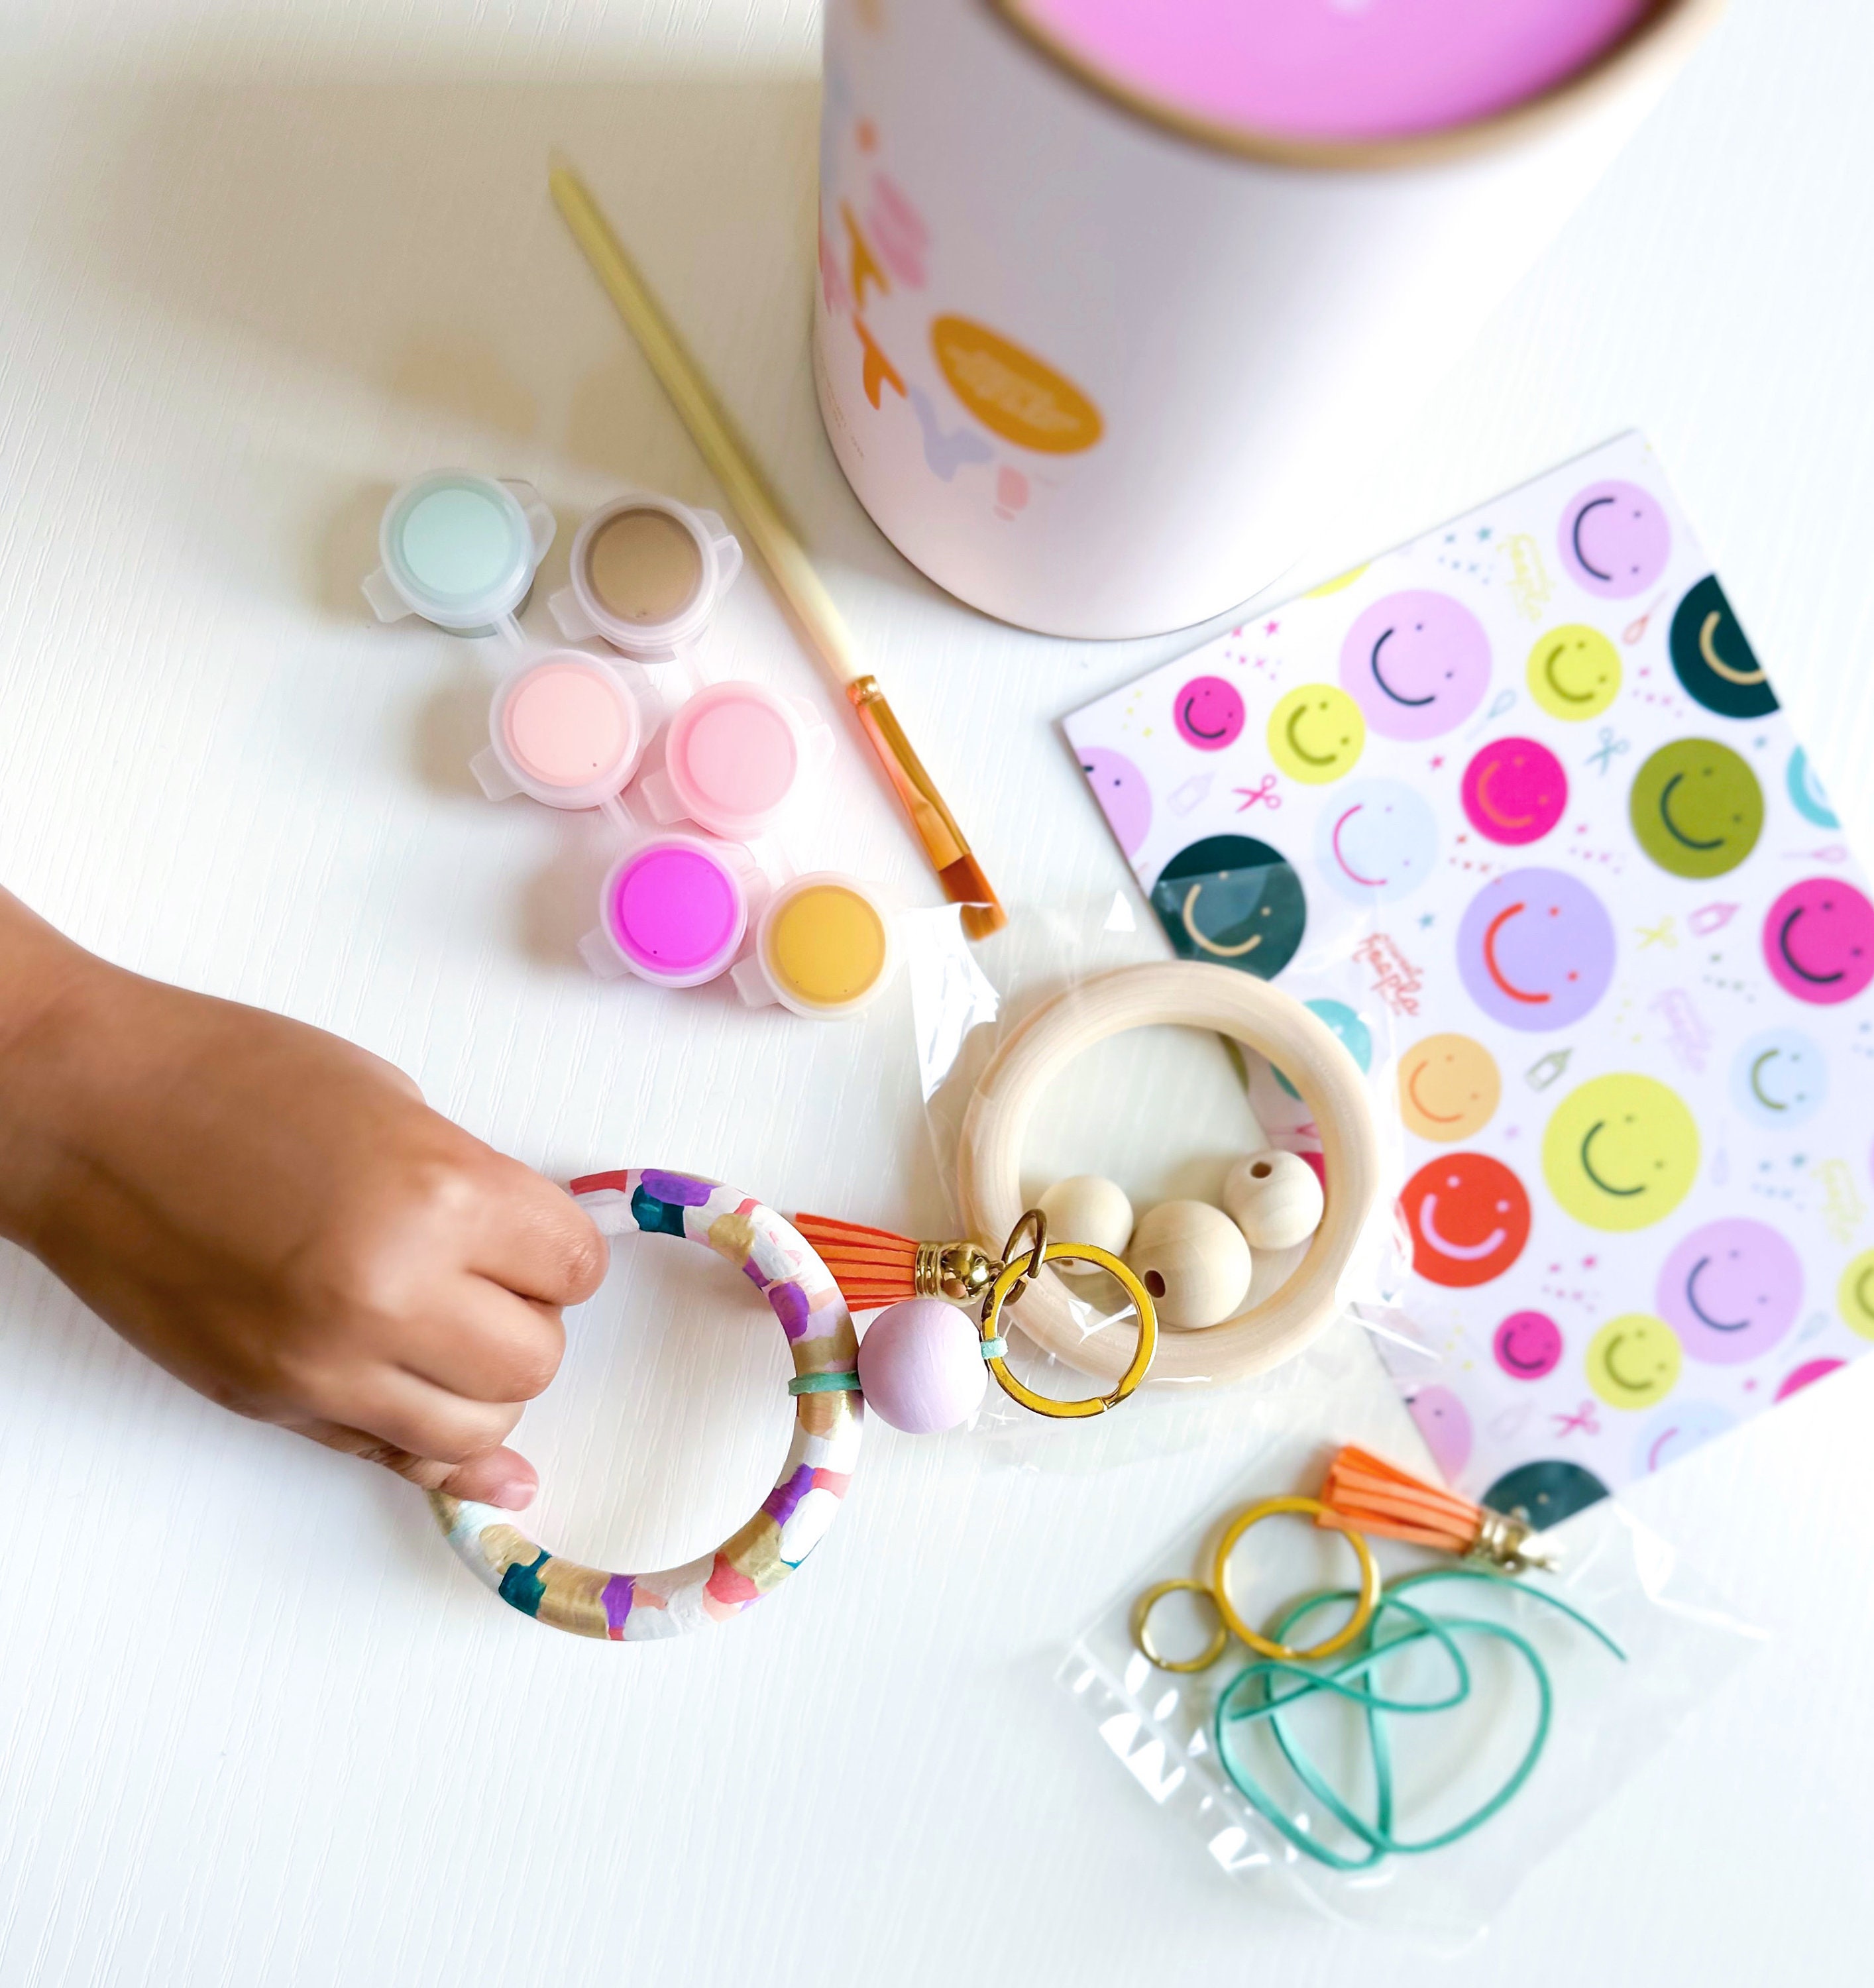 Business in a Box Craft Kit for Kids: Creative Keychains DIY Craft